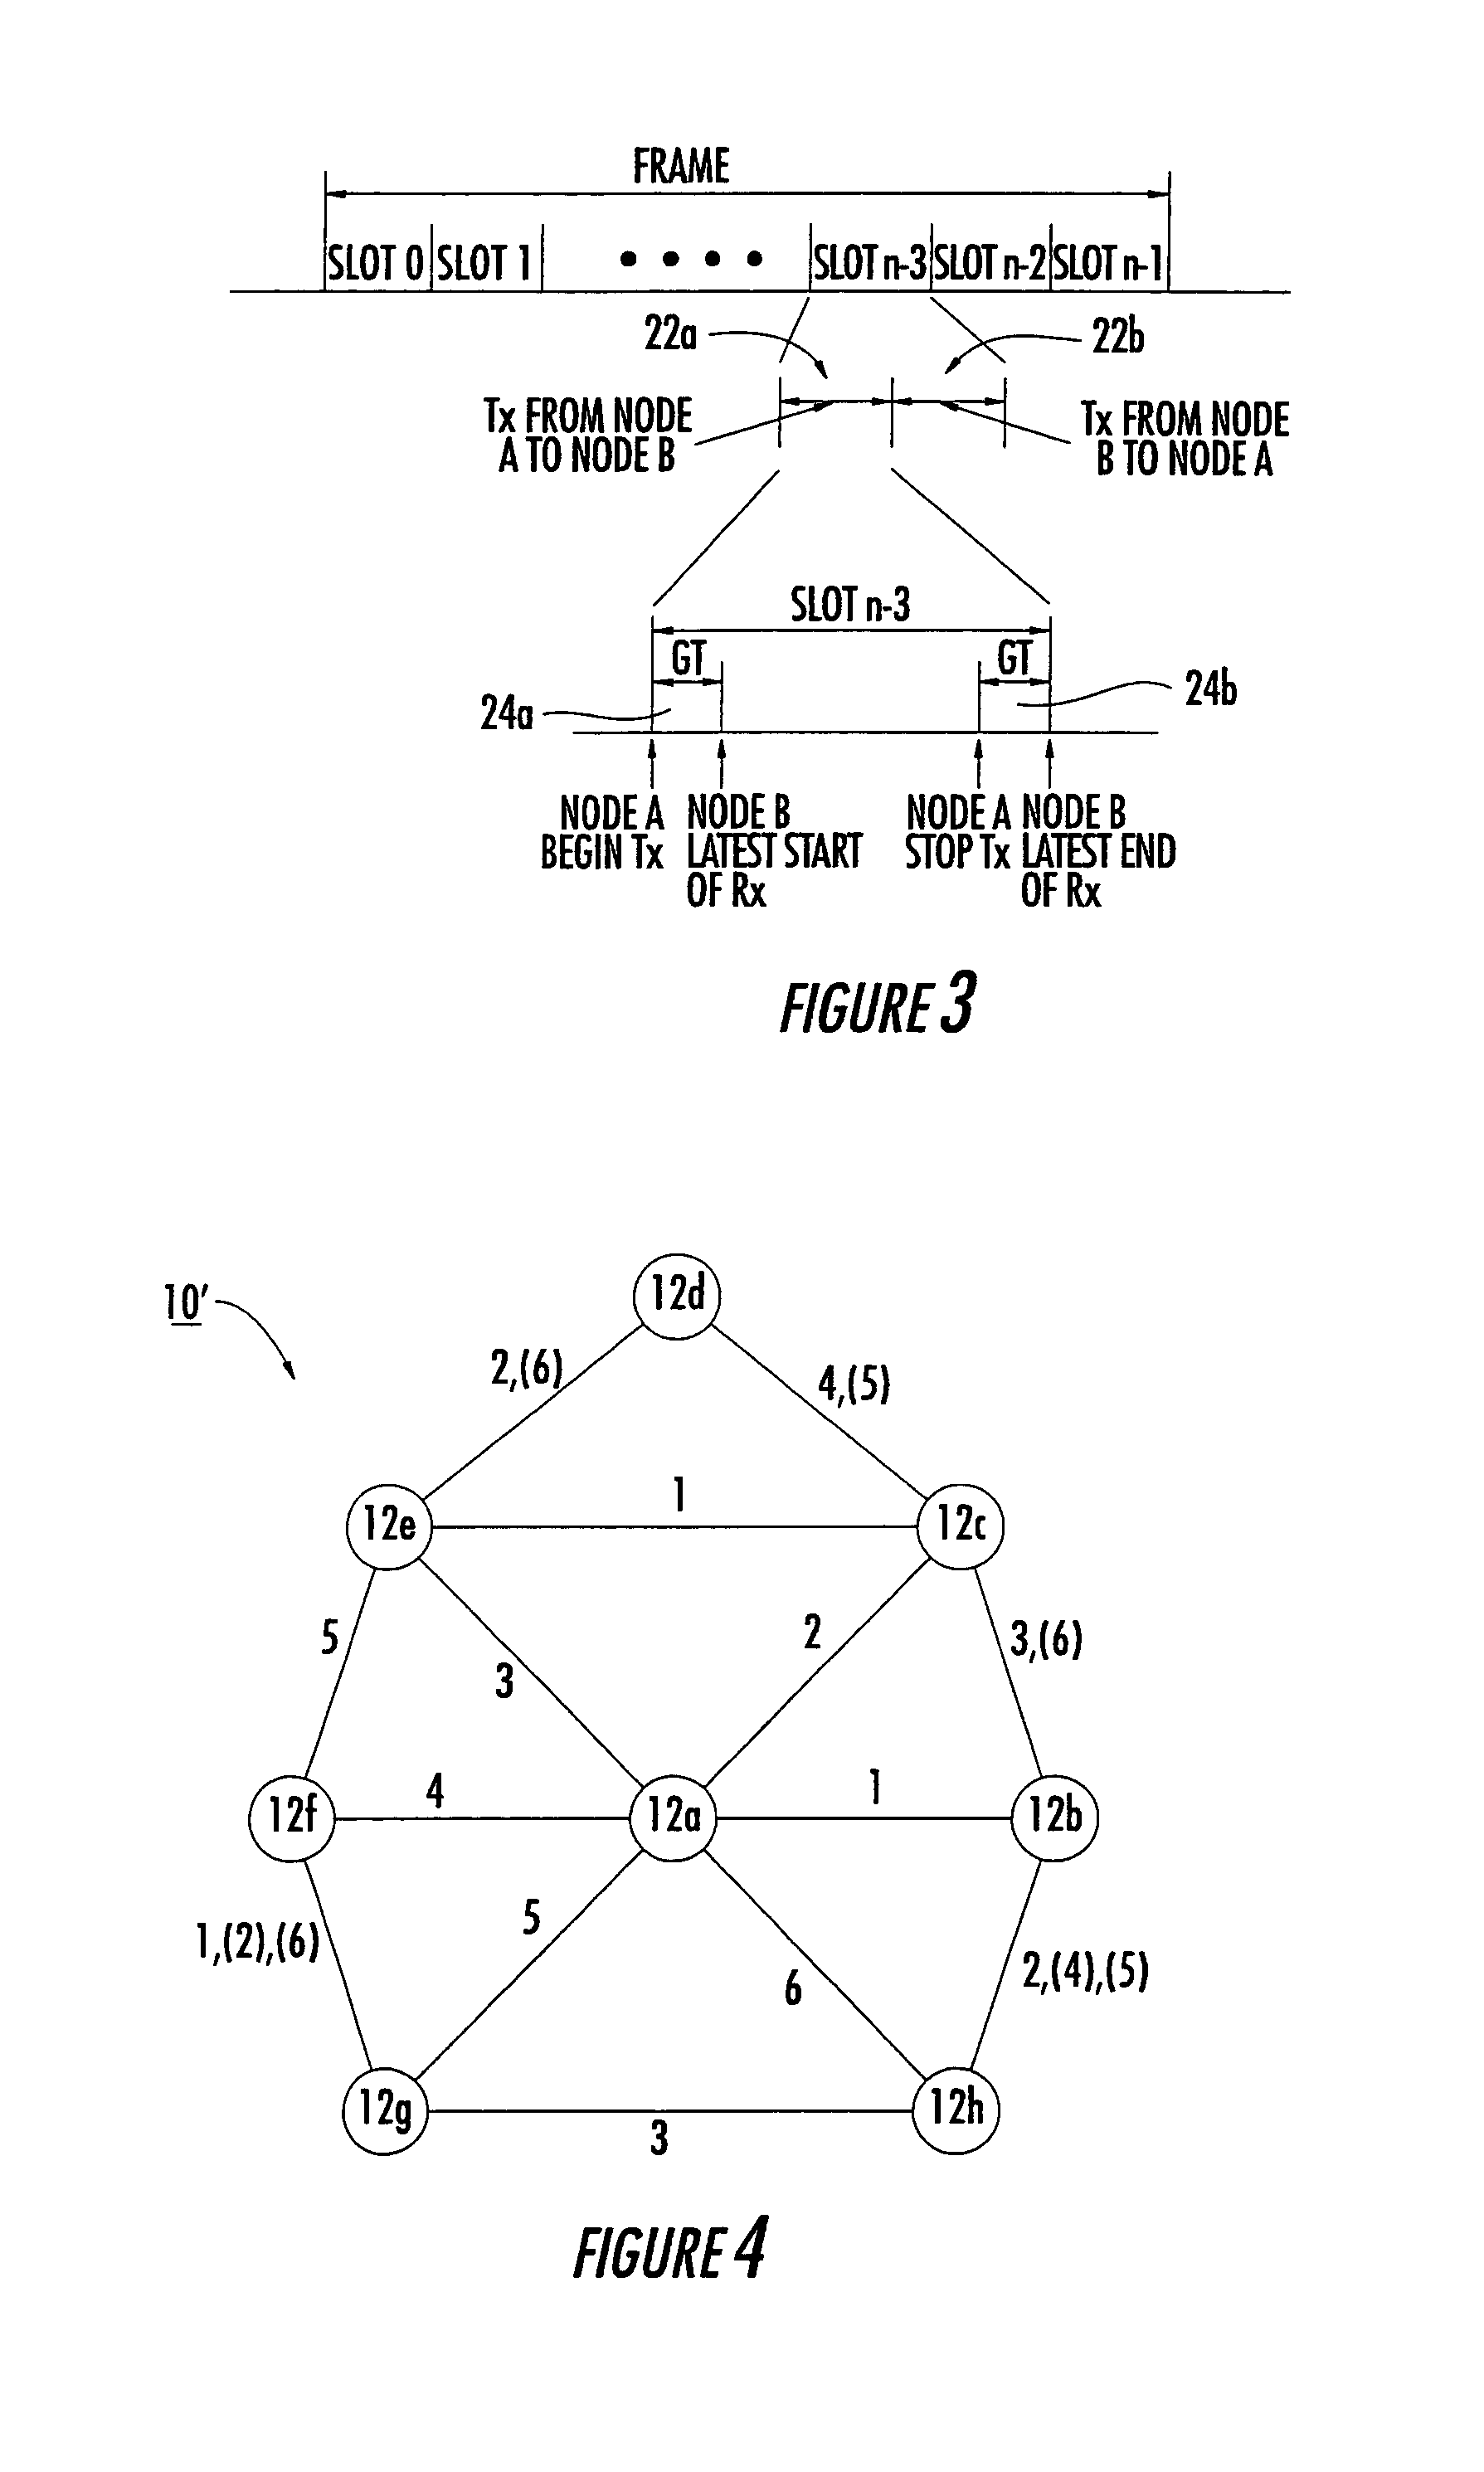 Wireless communication network including data prioritization and packet reception error determination features and related methods